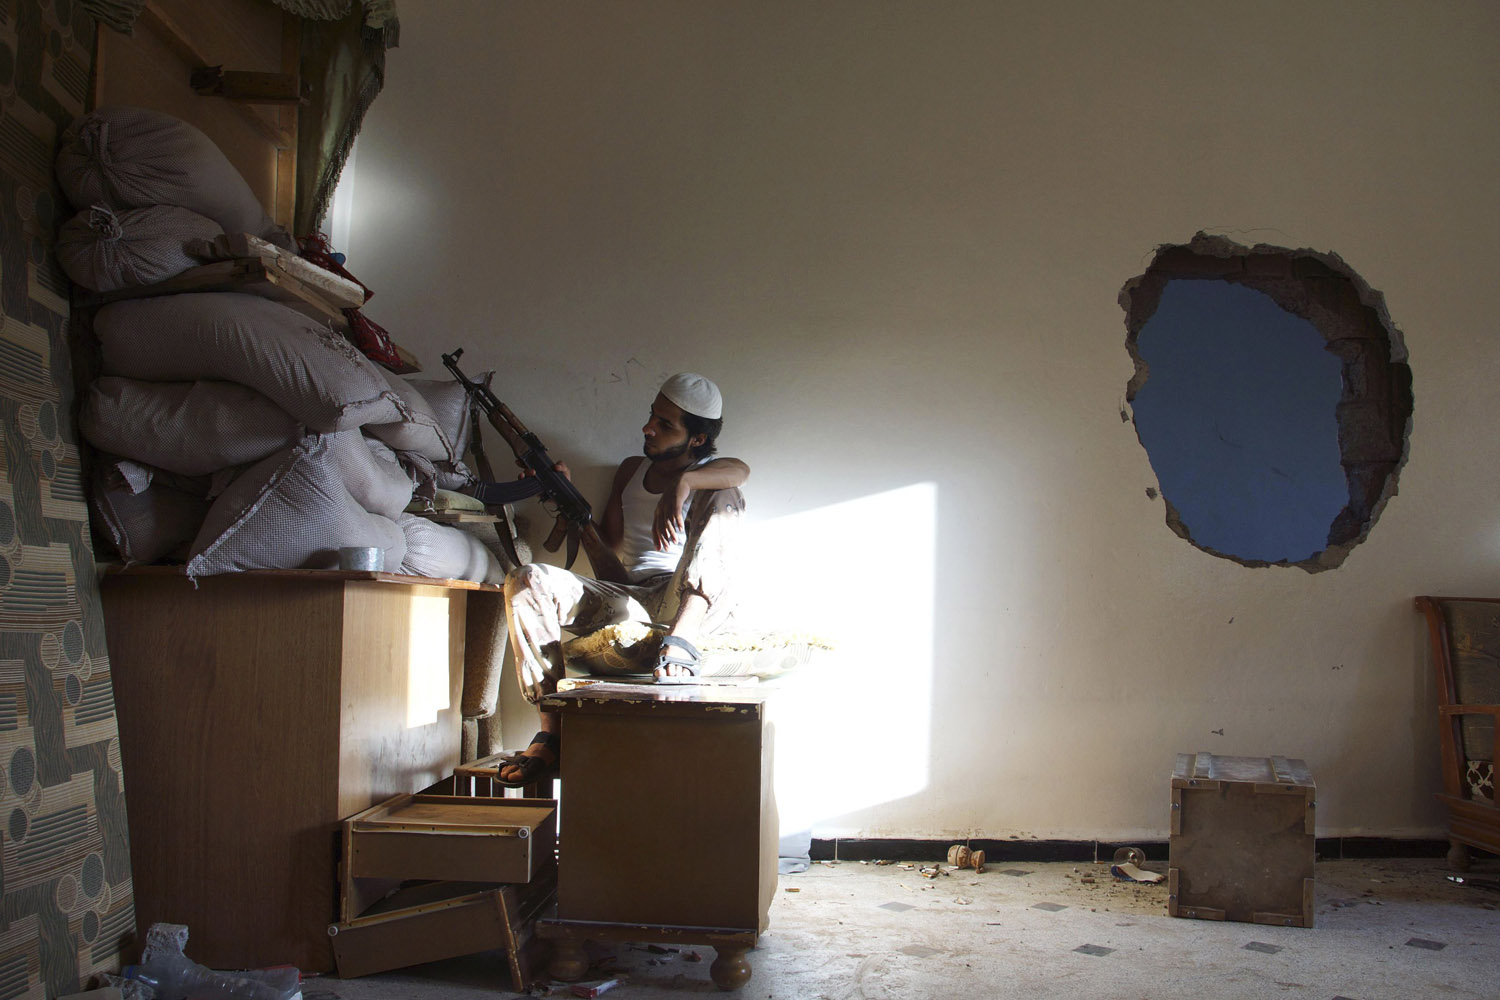 A Free Syrian Army fighter takes cover behind sandbags inside a house as in Deir al-Zor